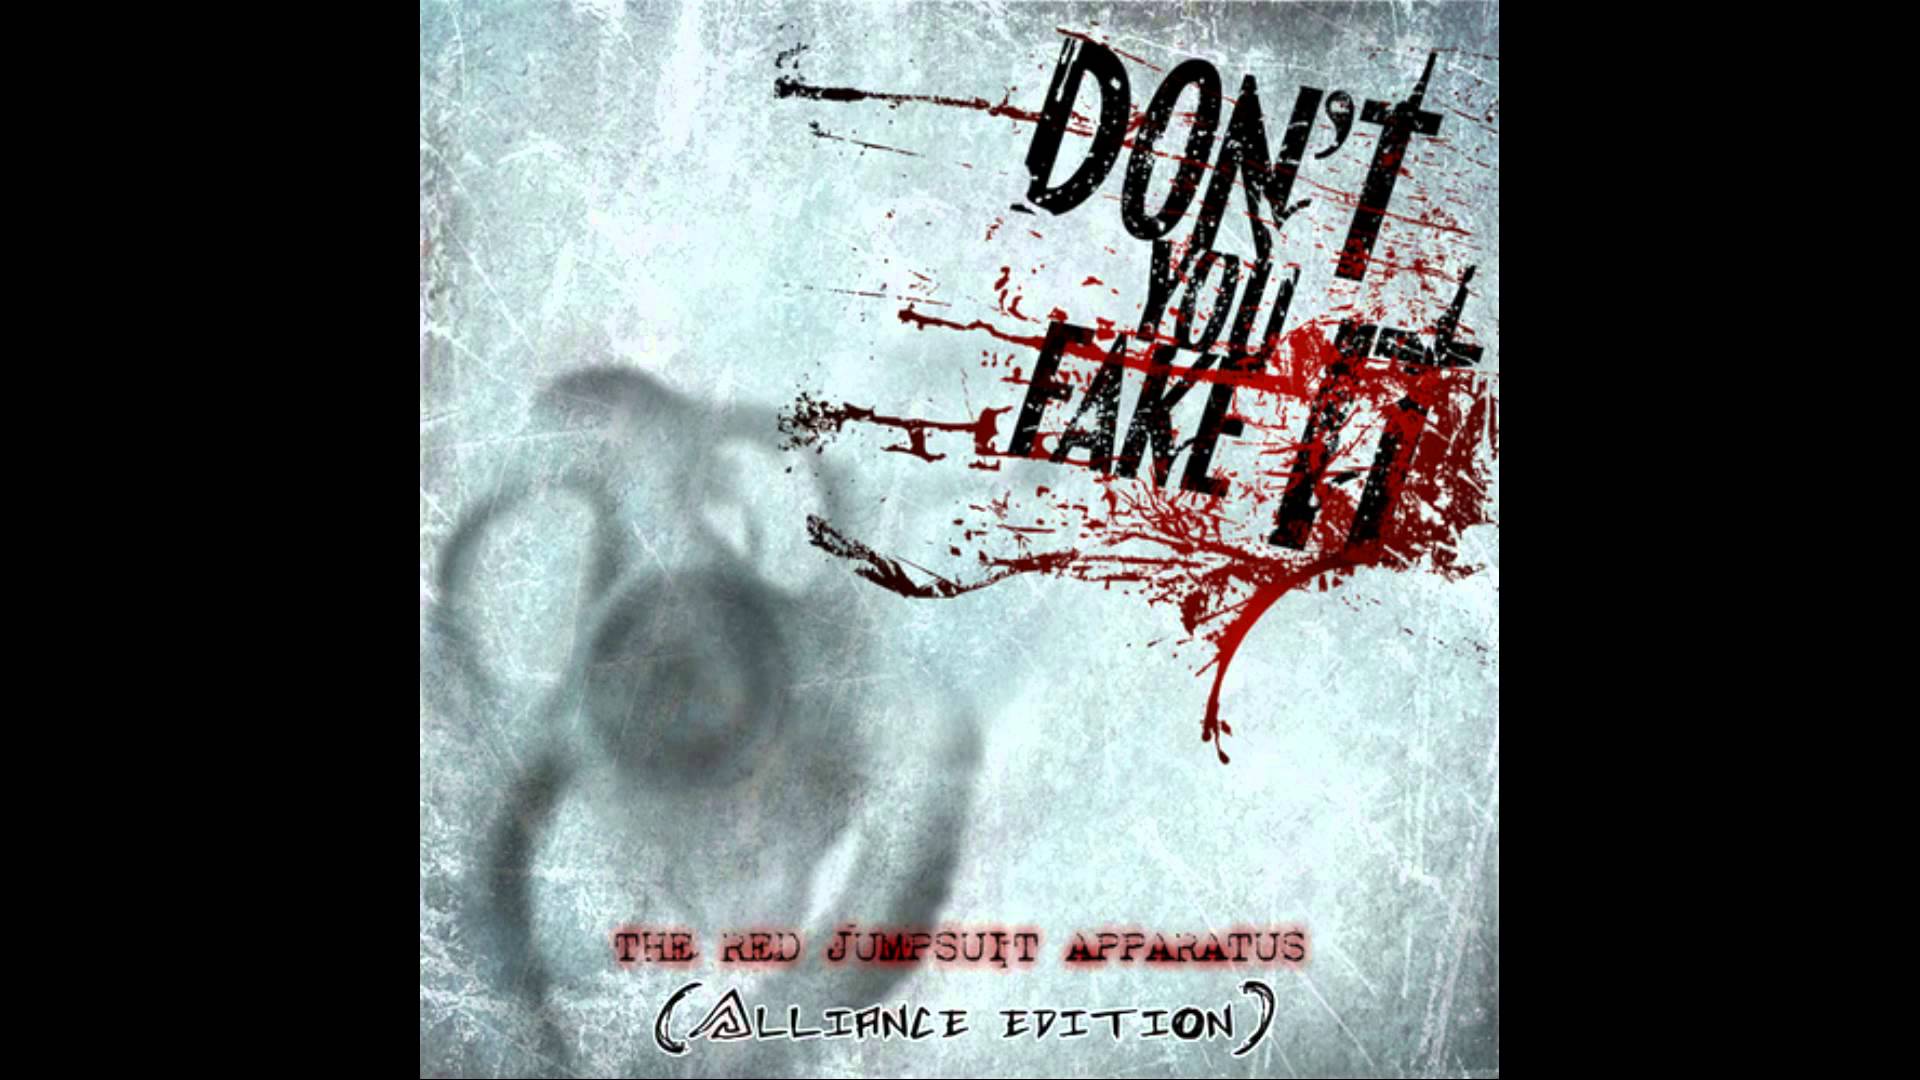 The Red Jumpsuit Apparatus't You Fake It Alliance Edition